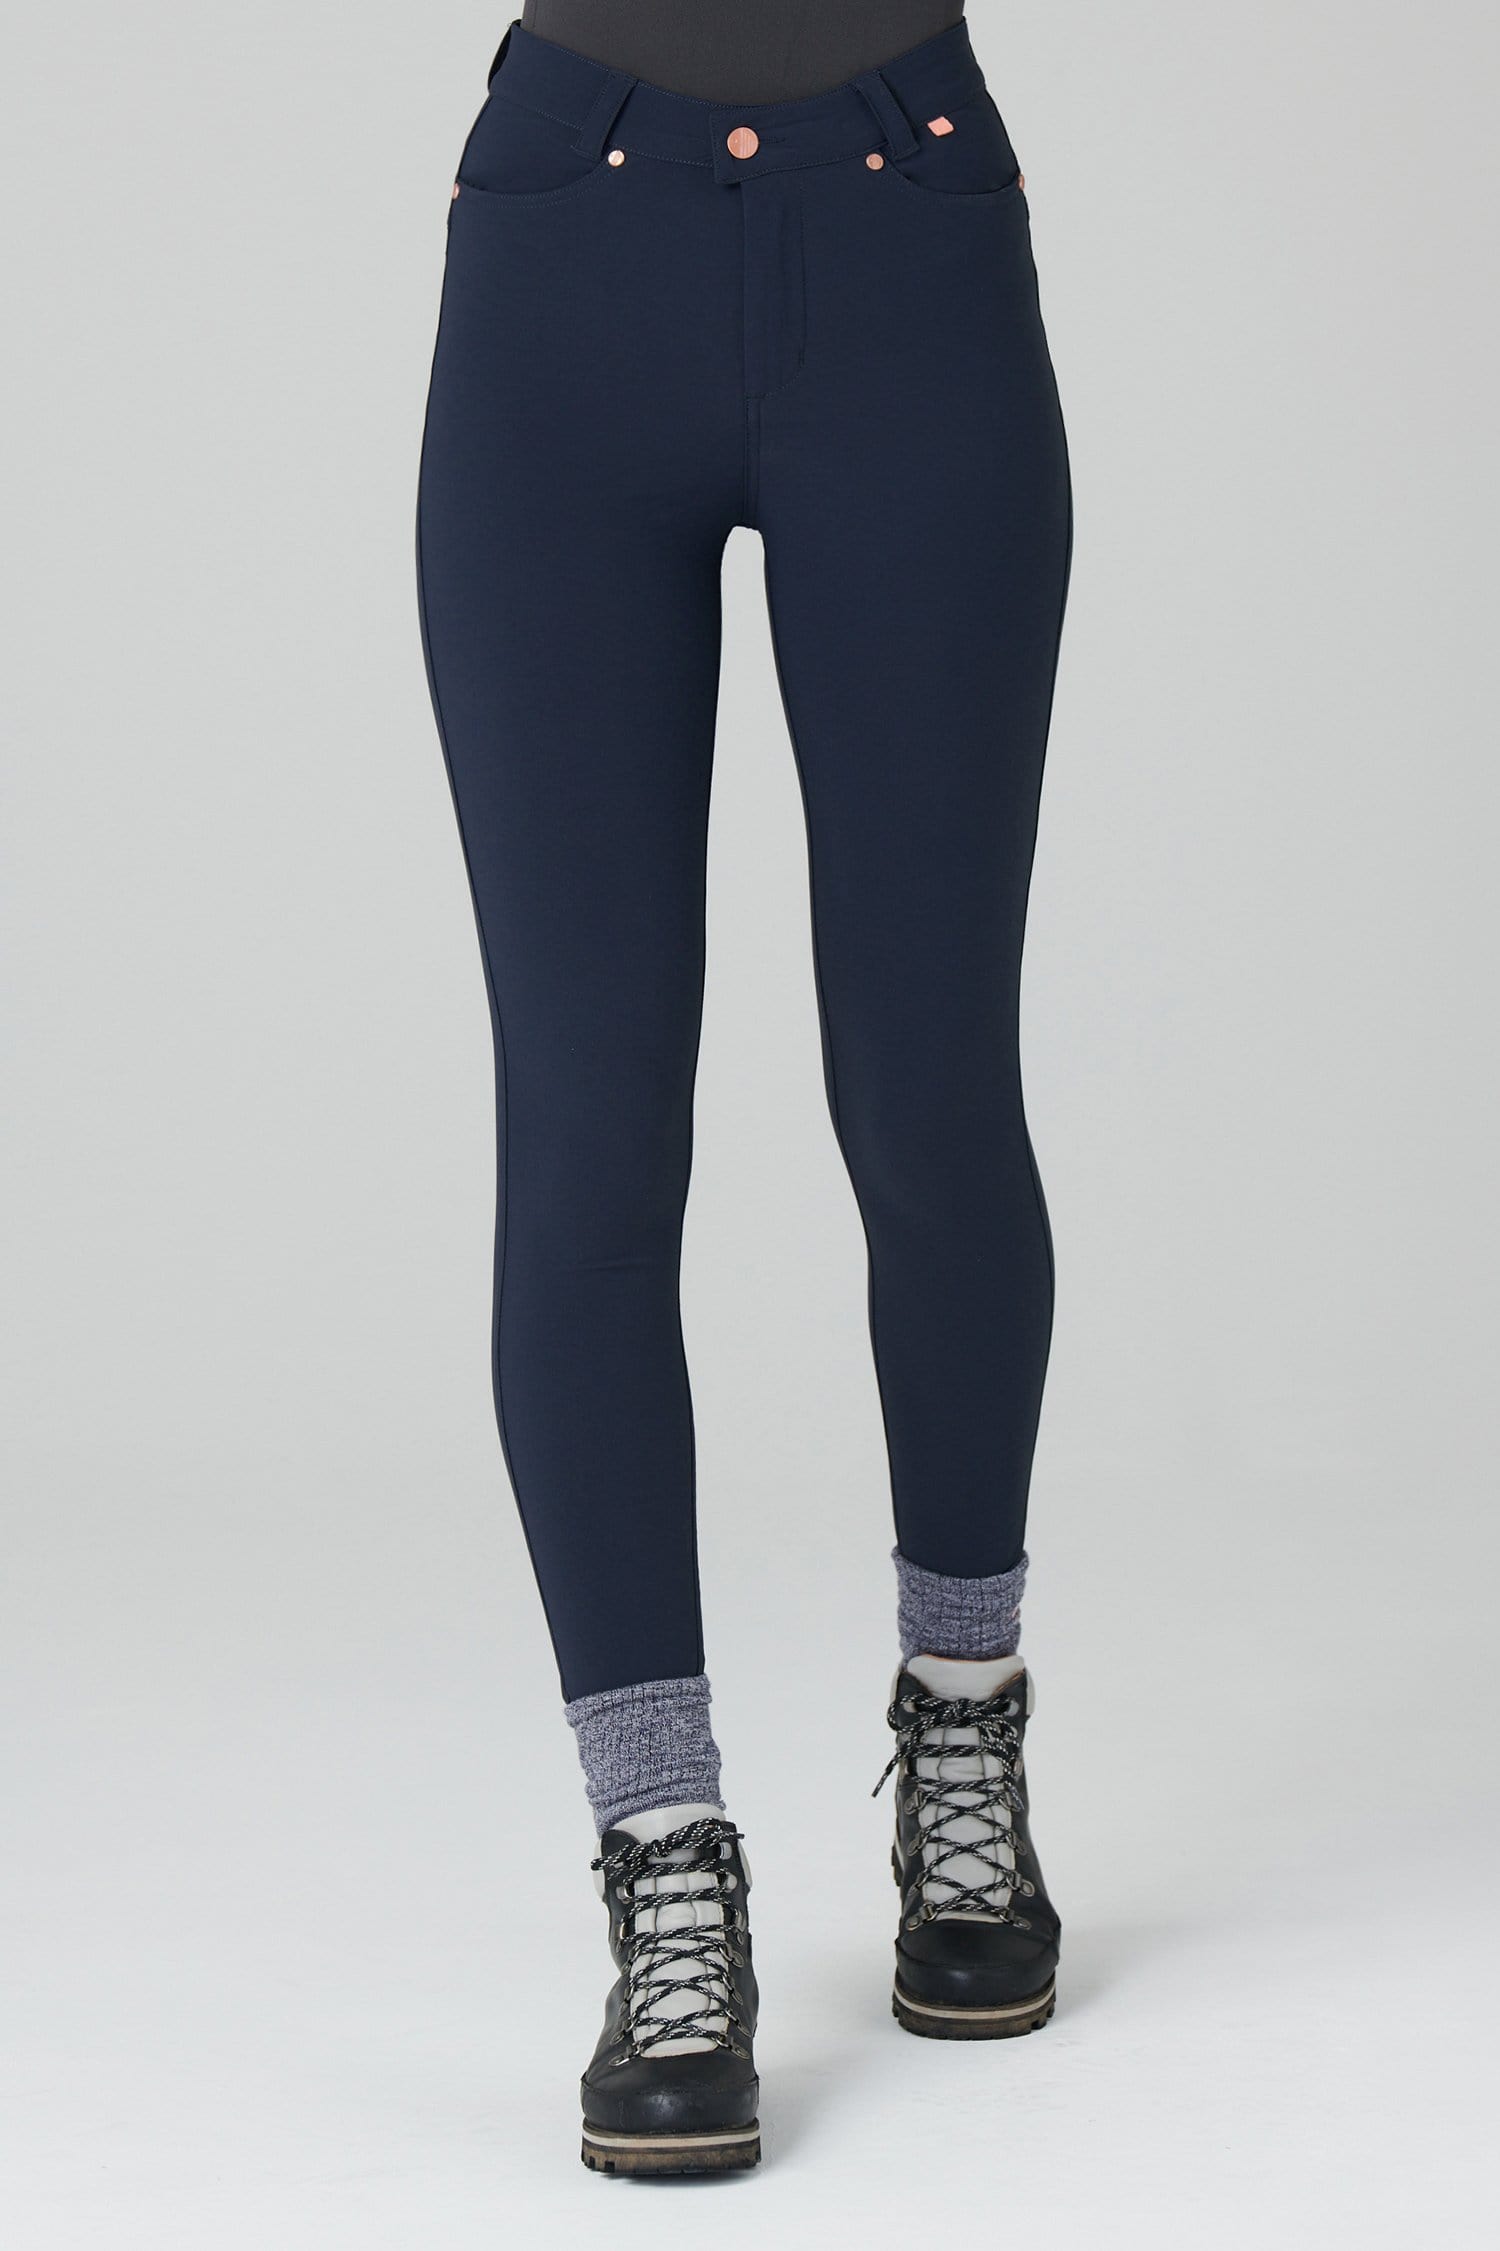 Thermal Skinny Outdoor Trousers - Deep Navy - 28l / Uk10 - Womens - Acai Outdoorwear